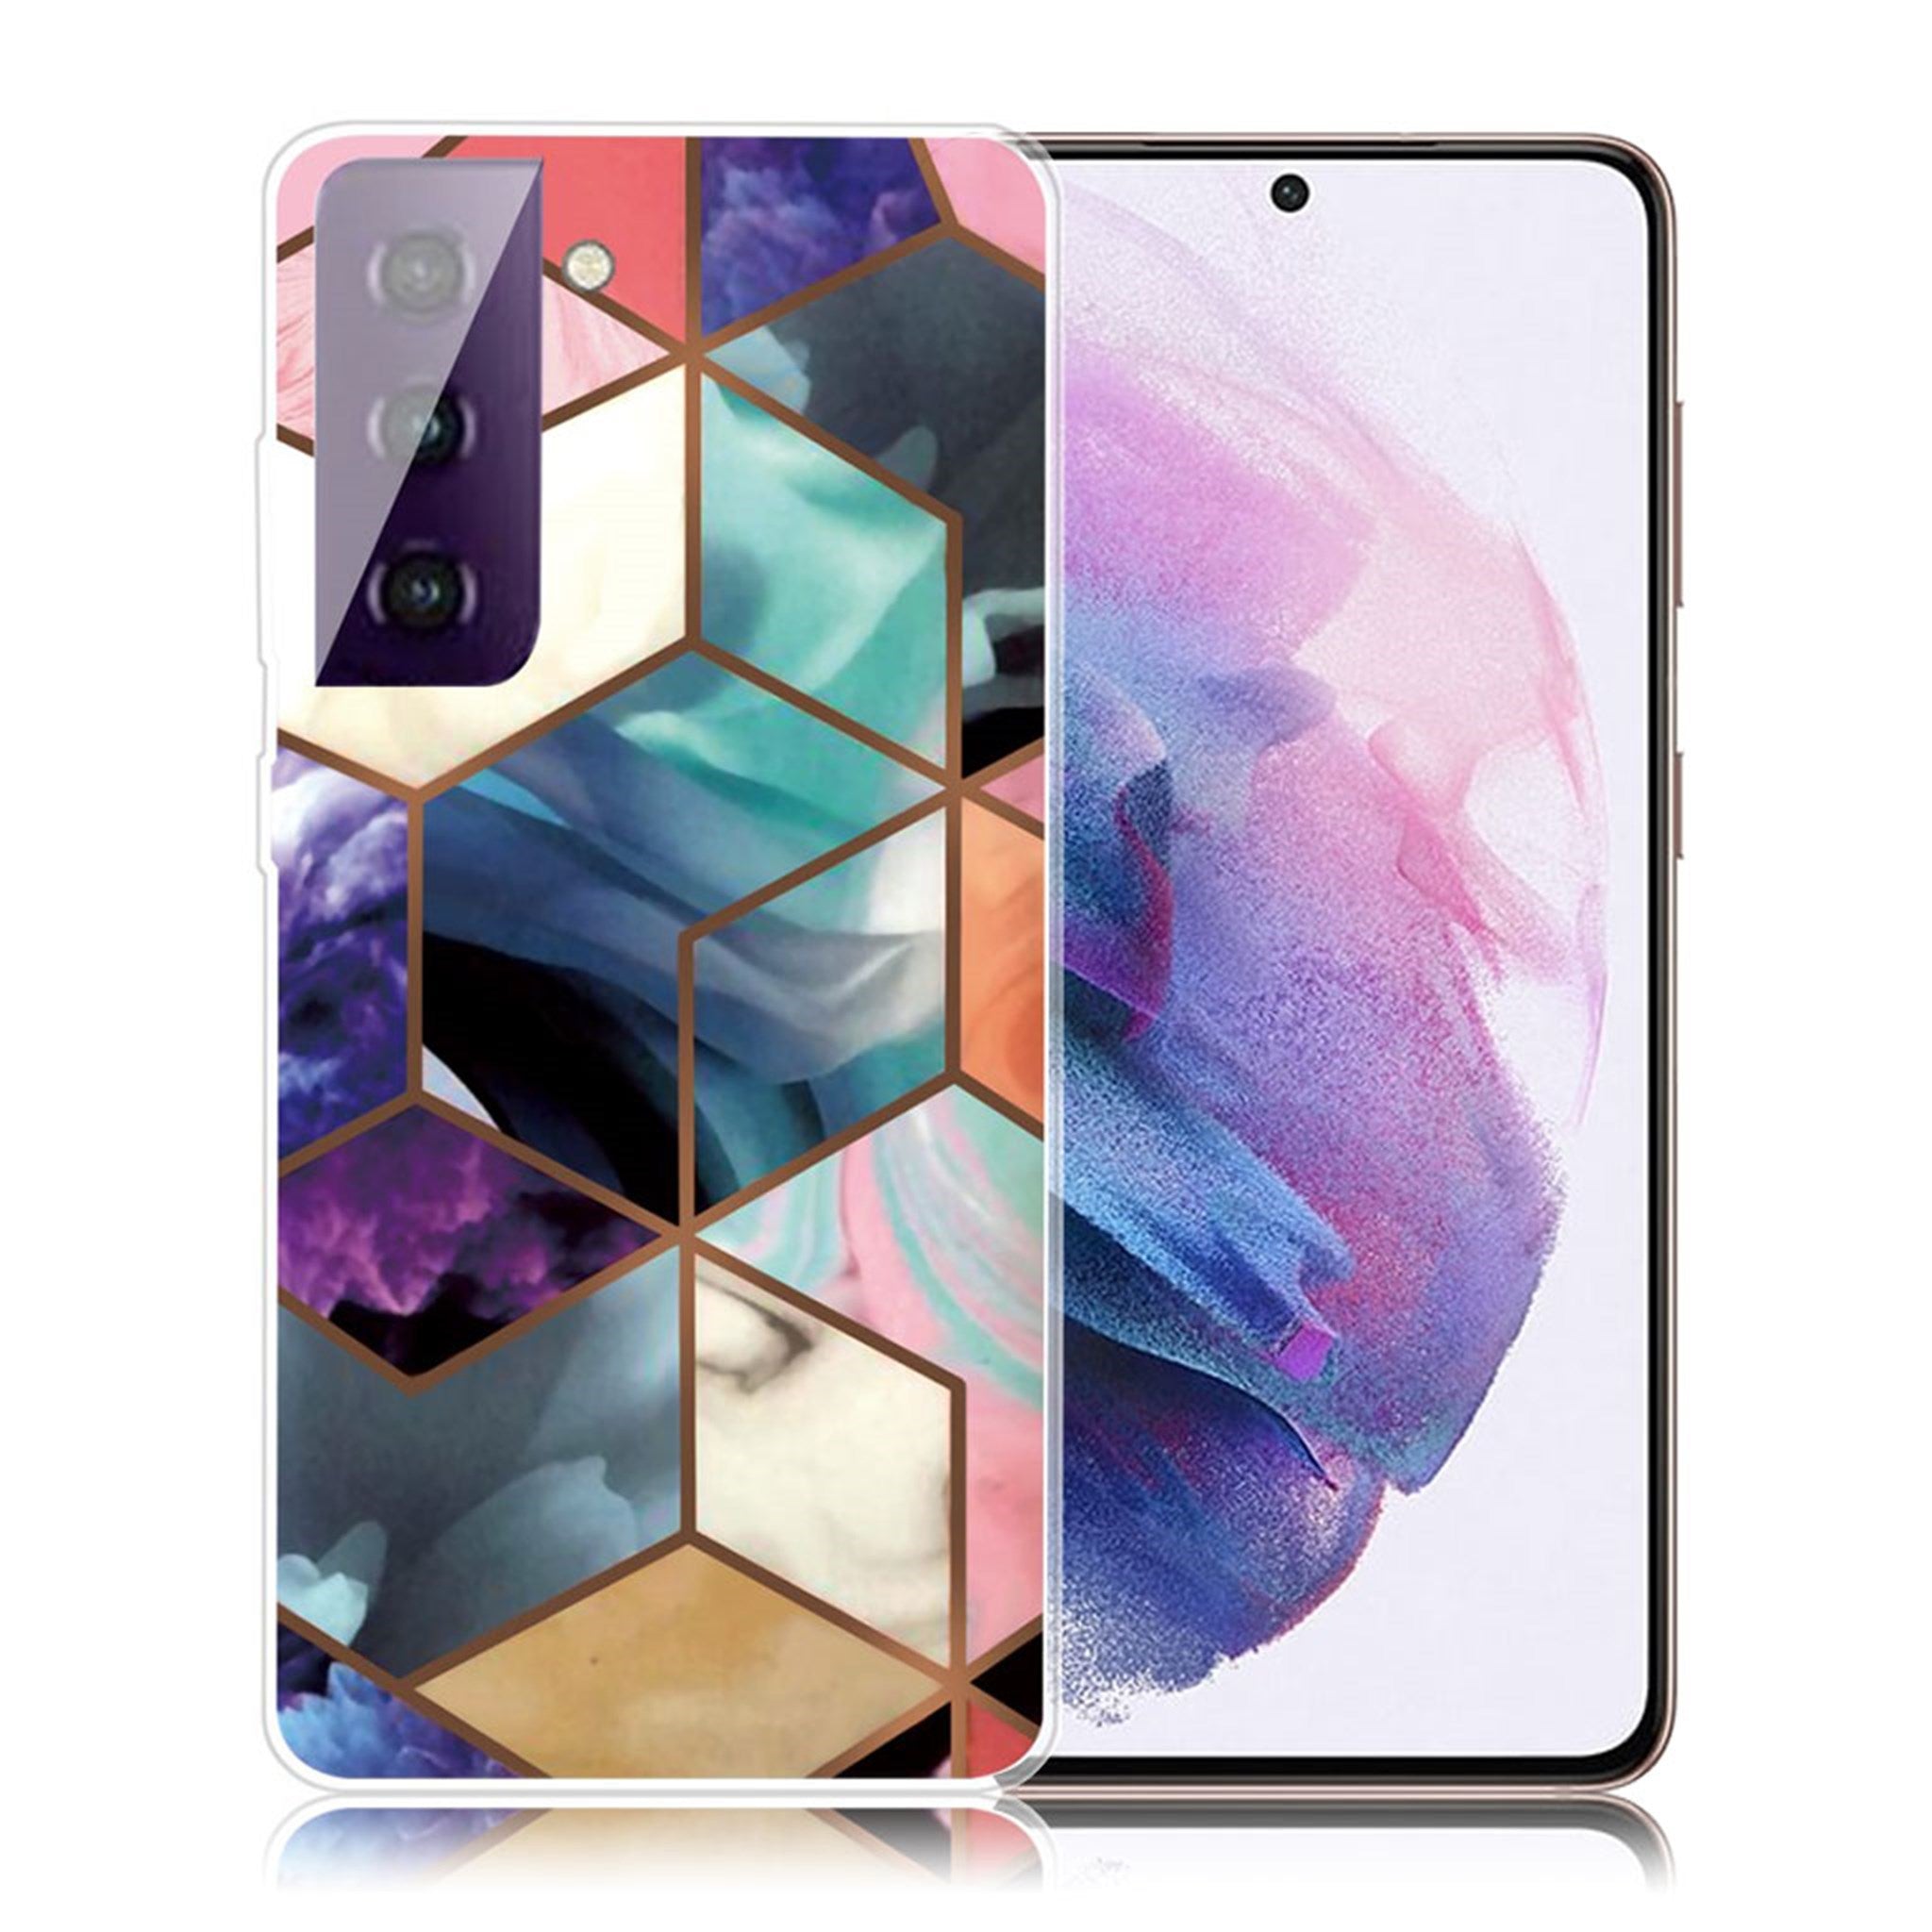 Marble Samsung Galaxy S21 FE case - Colorful Cube Tile